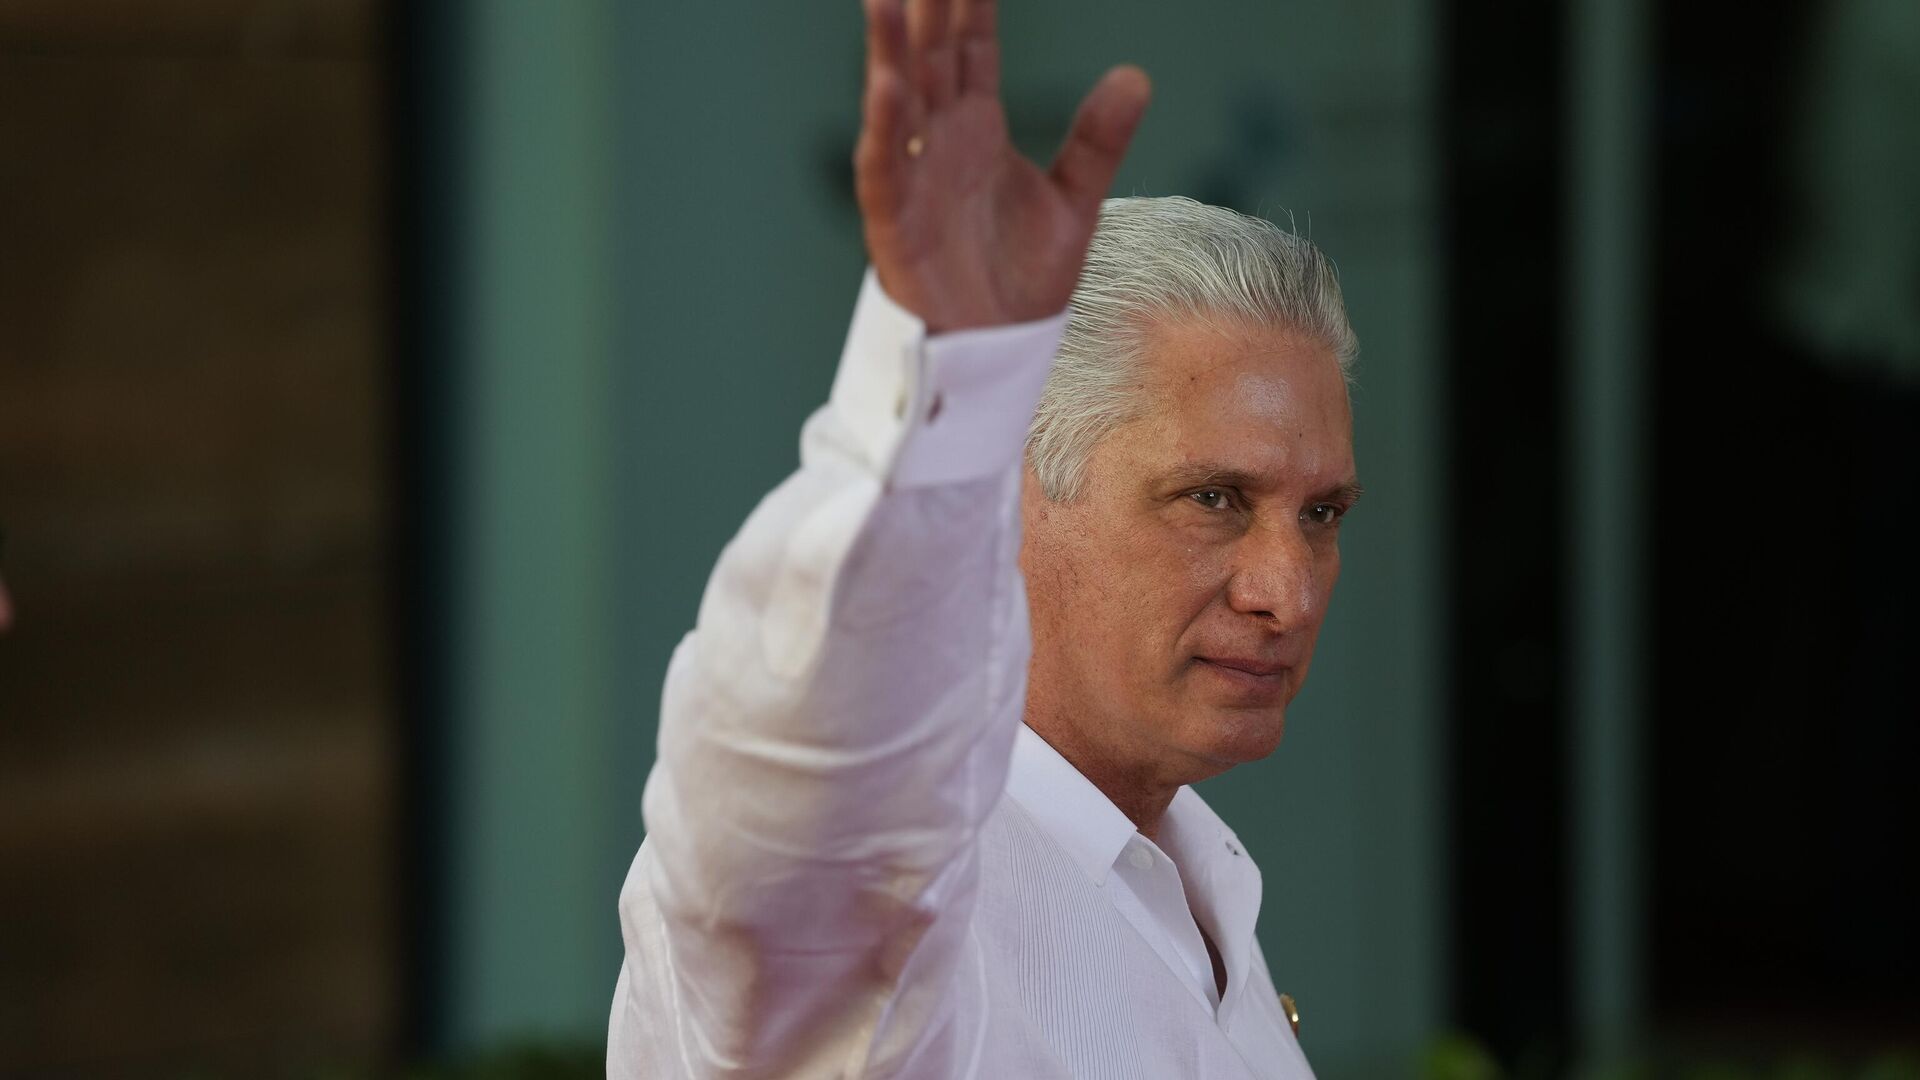 Cuba's President Miguel Diaz-Canel waves as he arrives for a session during the 28th Ibero-American Summit in Santo Domingo, Dominican Republic, March 25, 2023. - Sputnik Africa, 1920, 23.08.2023